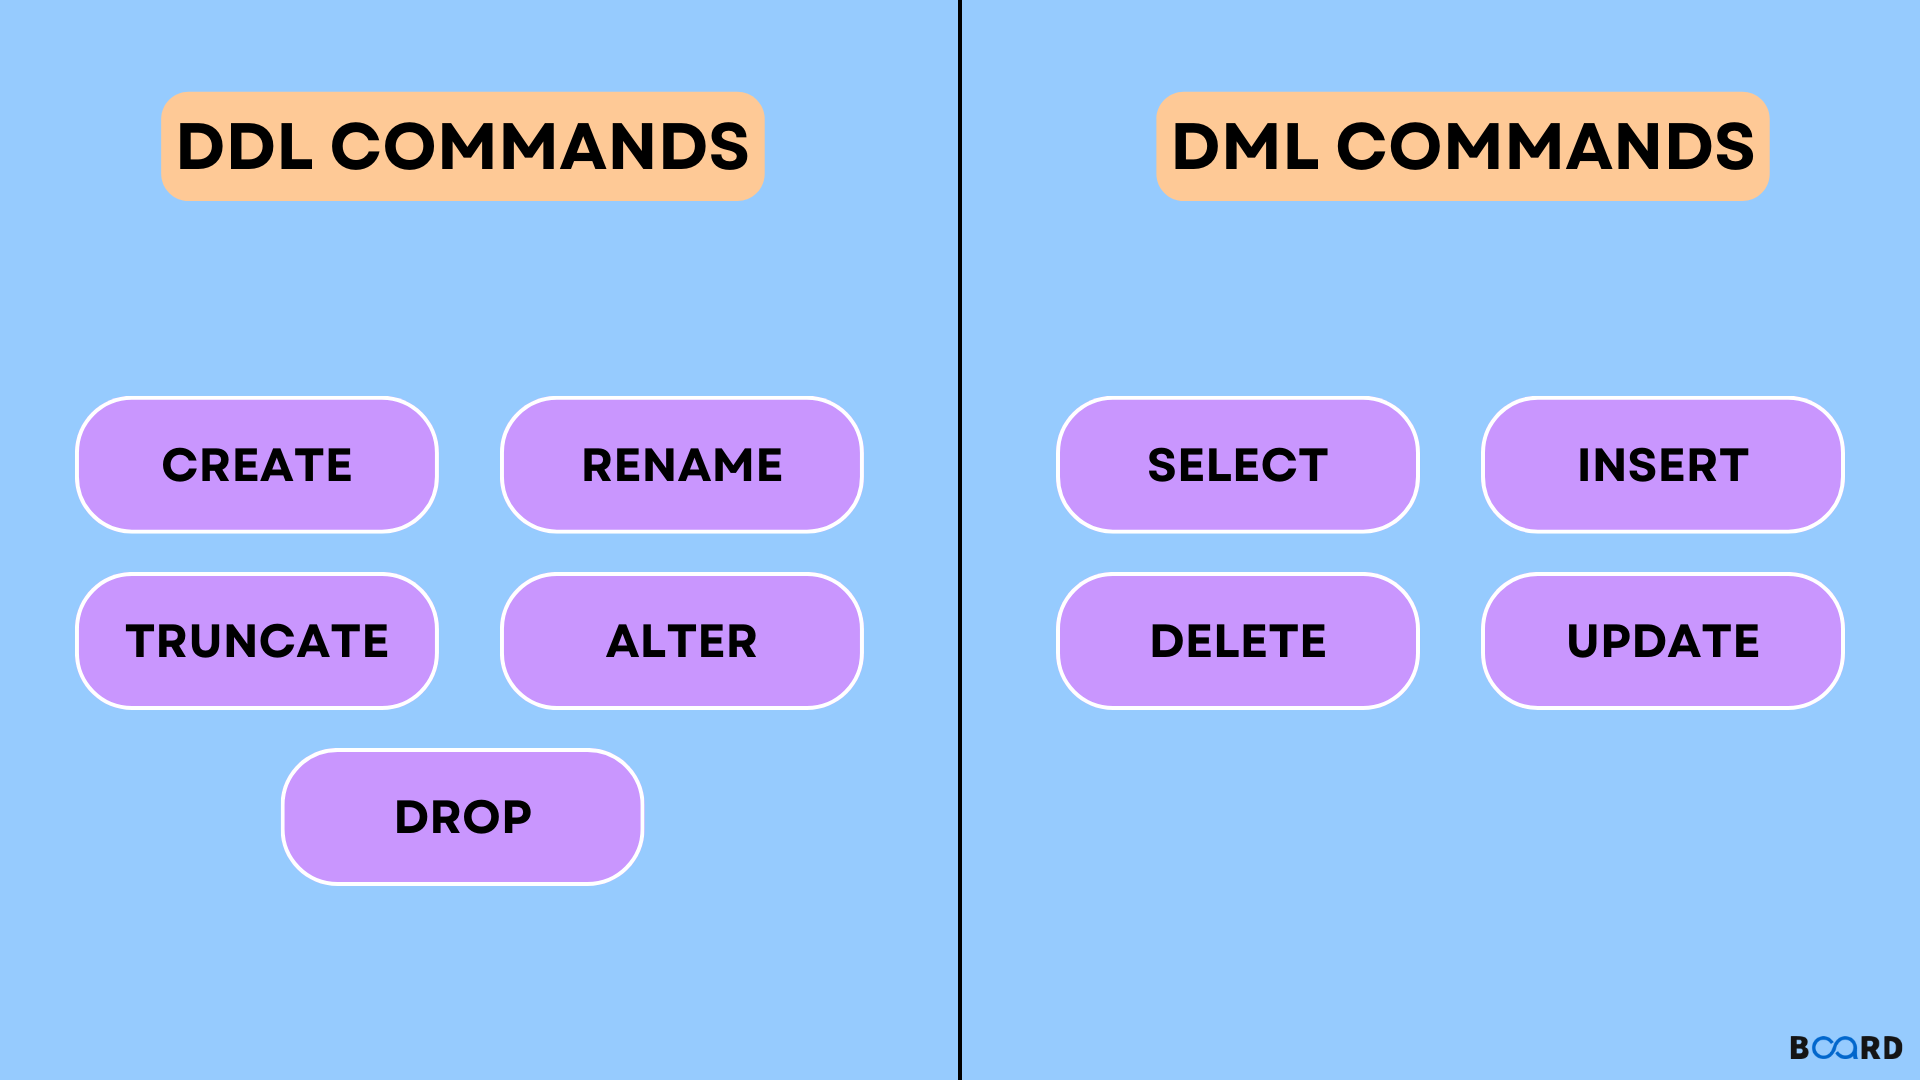 DDL and DML Commands Explanation and Differences Board Infinity